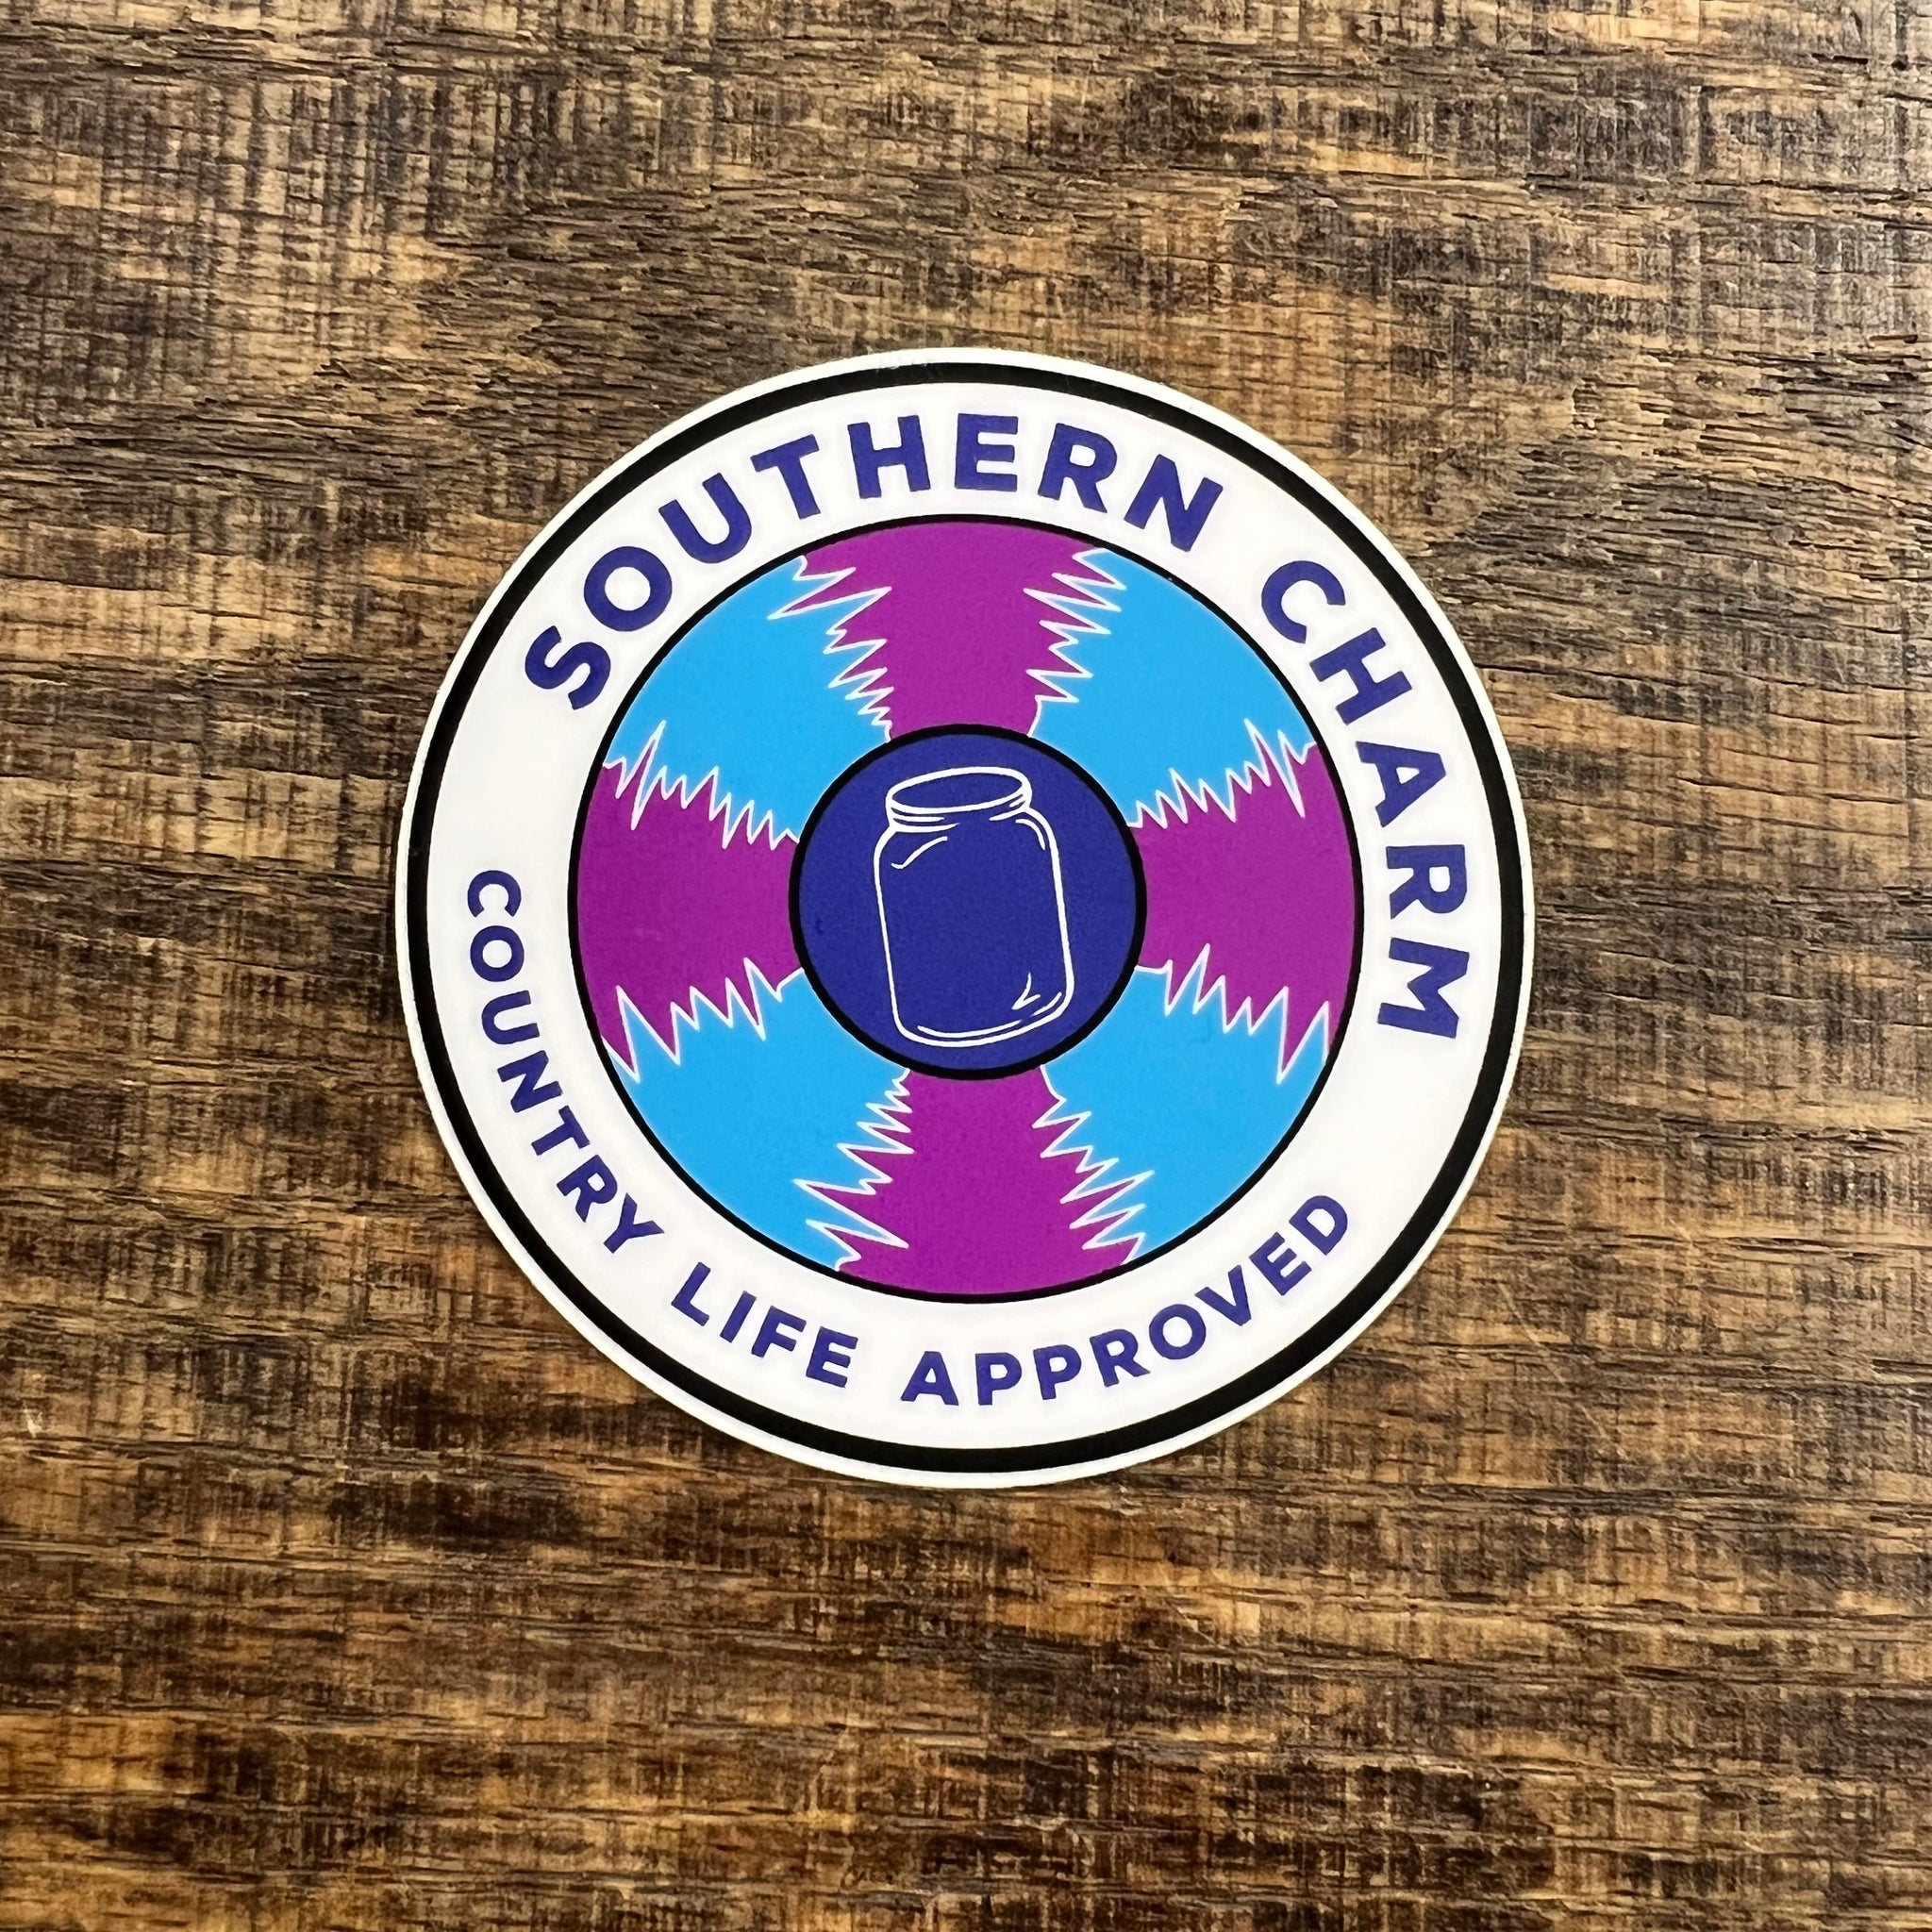 Southern Charm "Record" Sticker - Blue And Purple